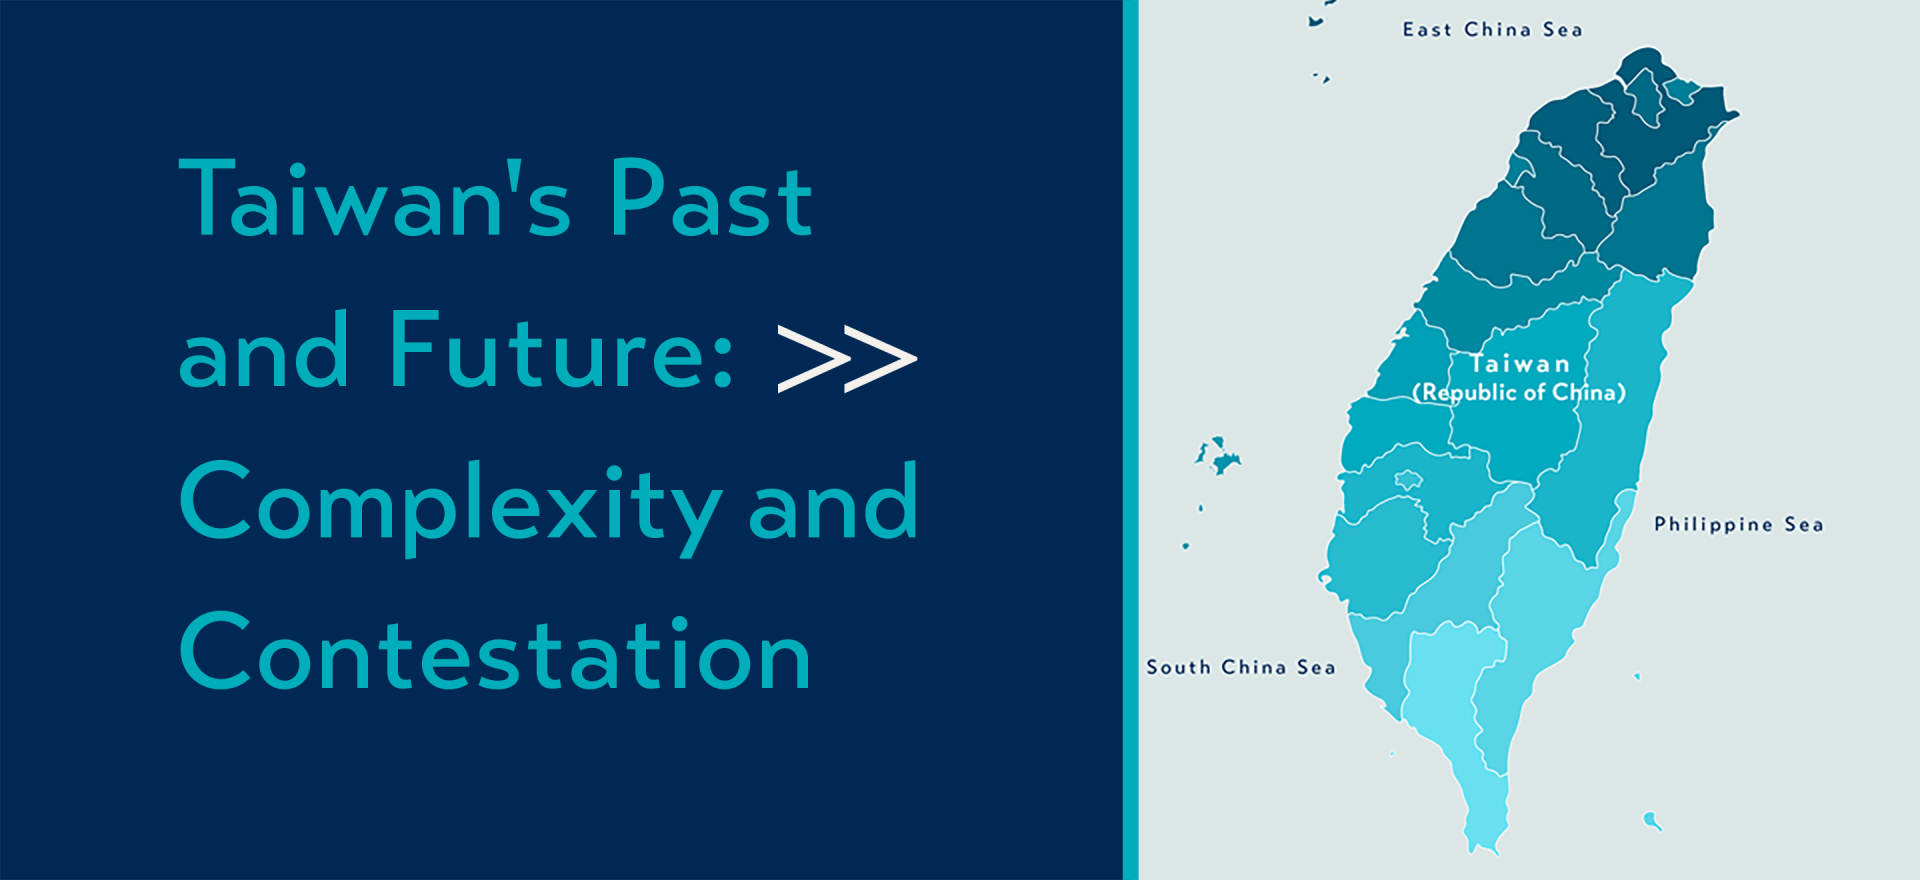 Taiwan's Past and Future: Complexity and Contestation